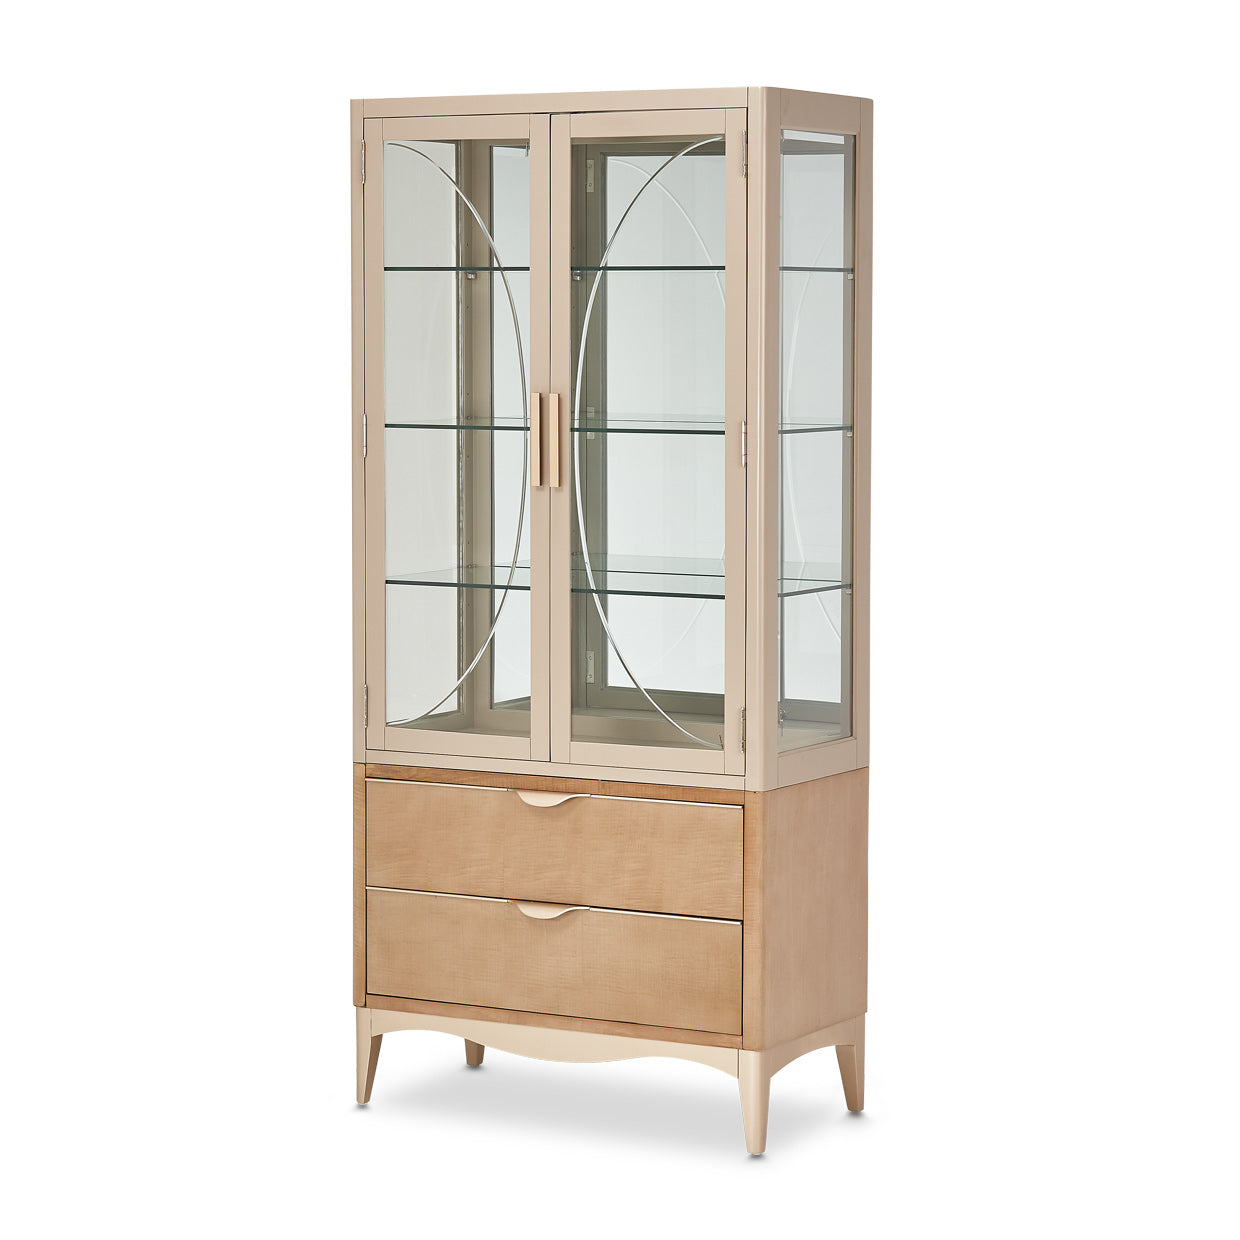 Display Cabinet (2 Pc), Malibu Crest Display Cabinet, Sophisticated display solution, Glass shelving, Mirrored back panel, LED display lighting, China display, Accents showcase, Hardwood solids construction, Pre-Dyed Swirl Mahogany veneer, Blush finish, Chardonnay accents, Velvet lined drawers, Self-closing glides, Curved waterfall pulls, Chardonnay finish details, Home decor highlight, Illuminated display, Elegant storage, solution, Stylish display piece, dream art , Michael amini